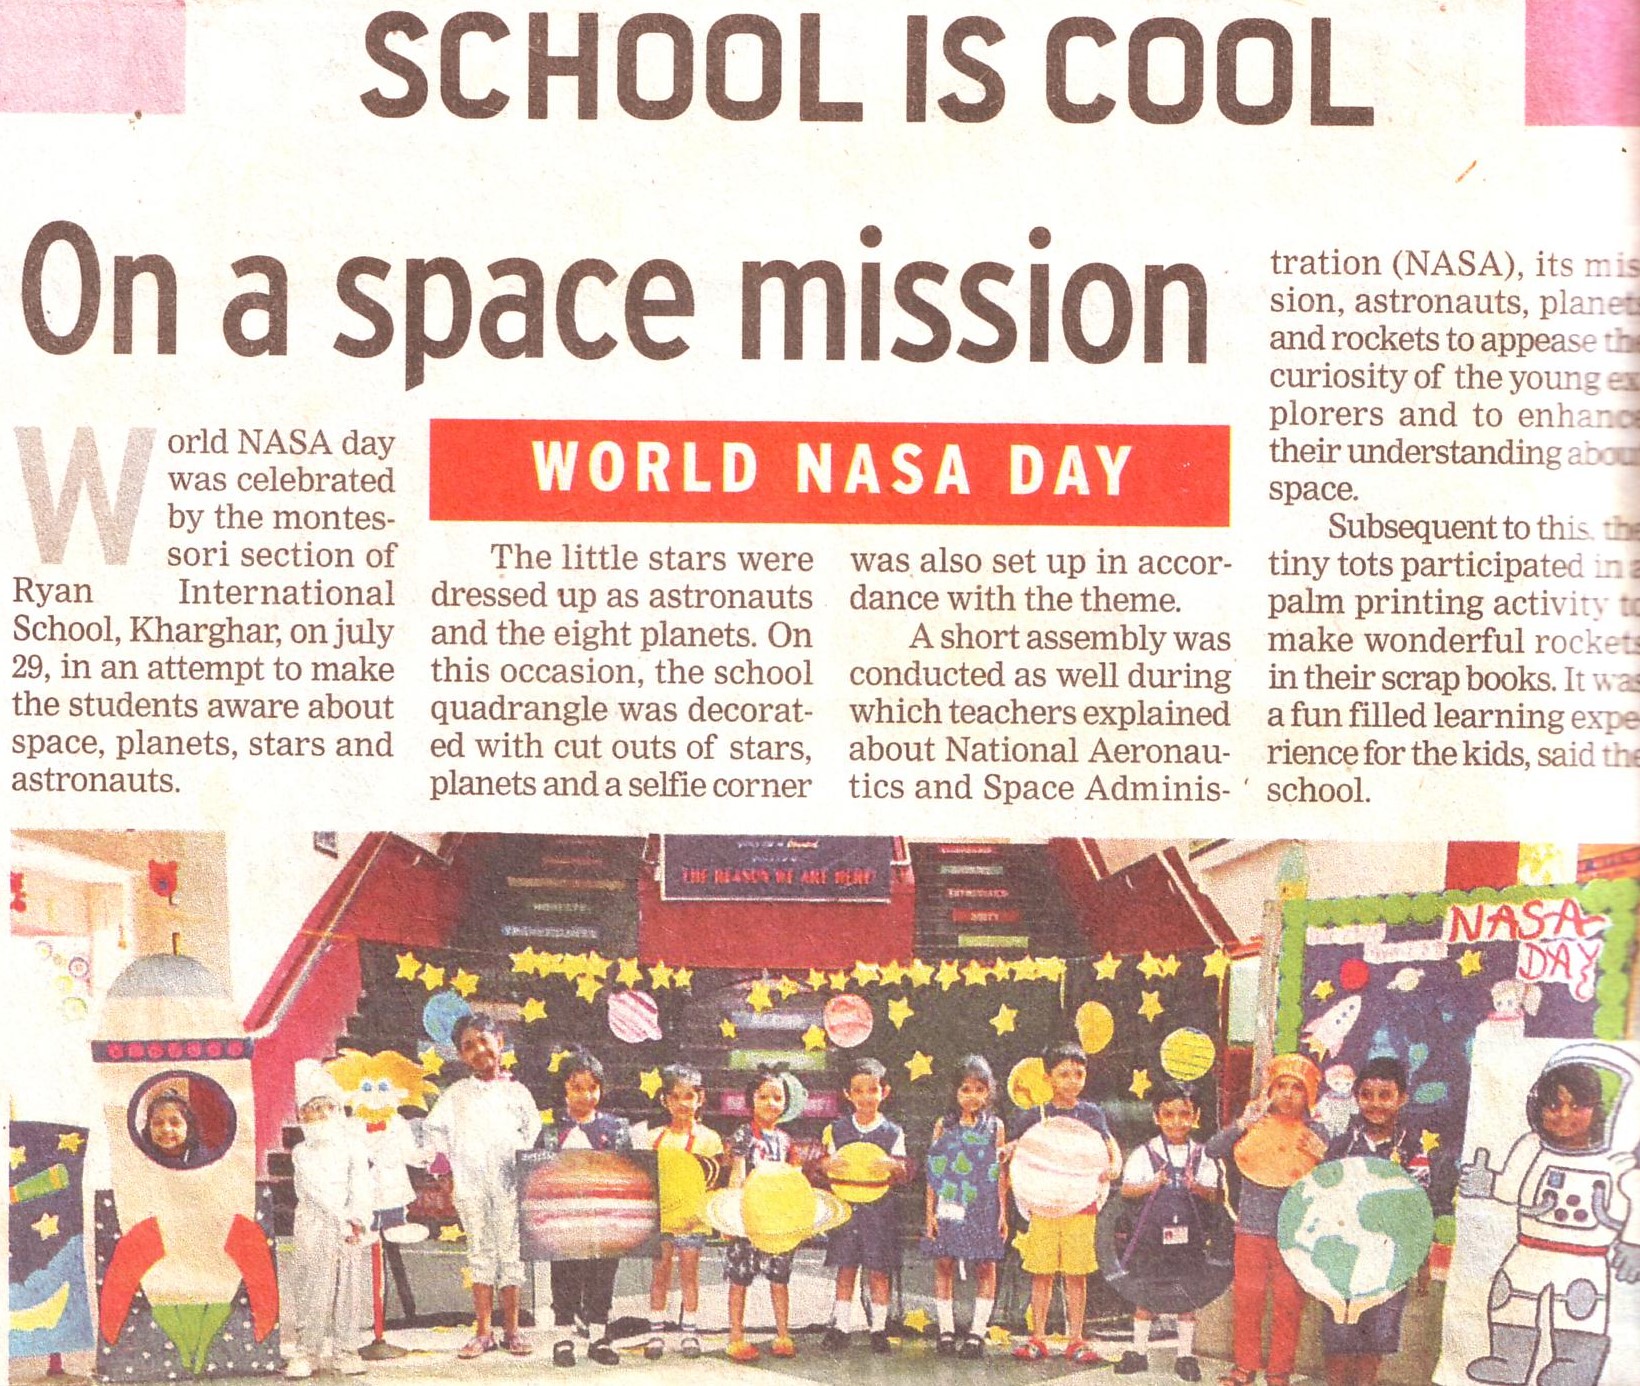 School is cool, on a space mission was mentioned in Times NIE - Ryan International School, Kharghar